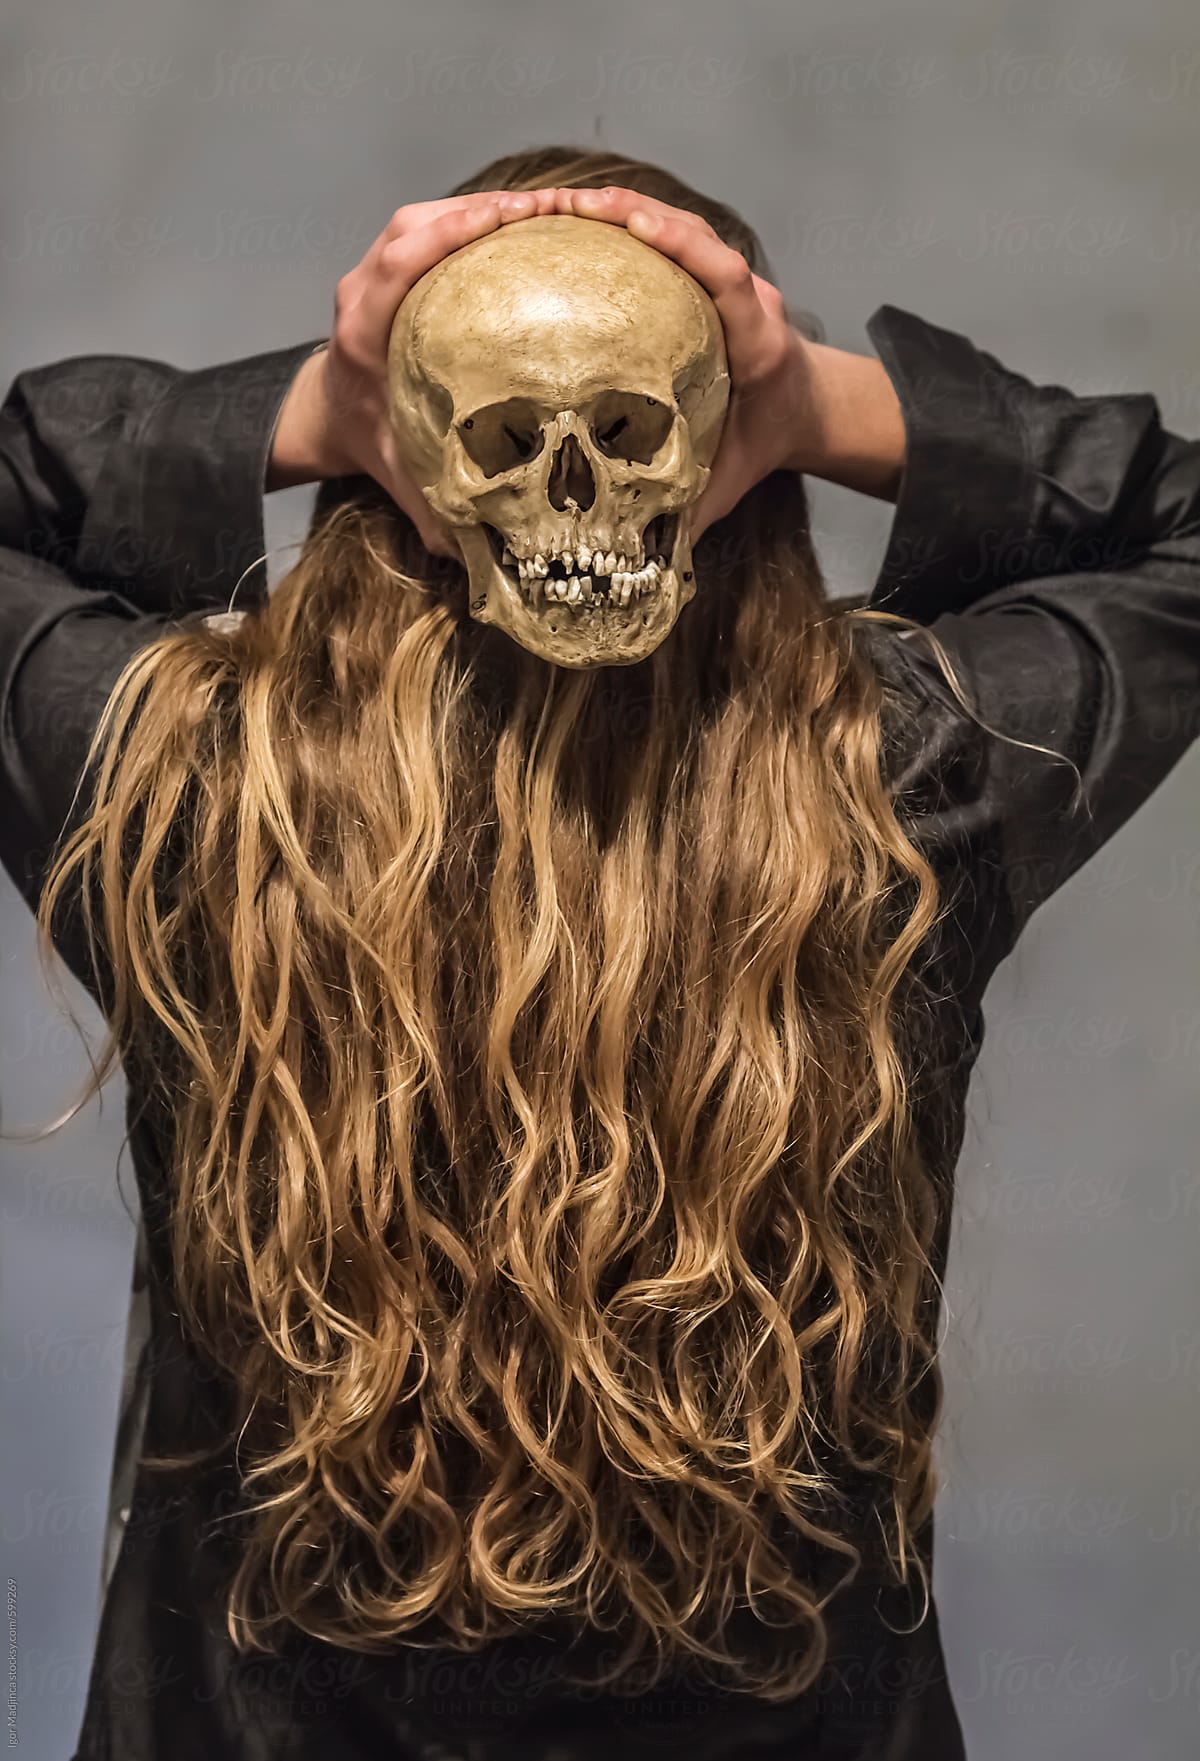 long-haired blond man from behind, holding the skull vertically